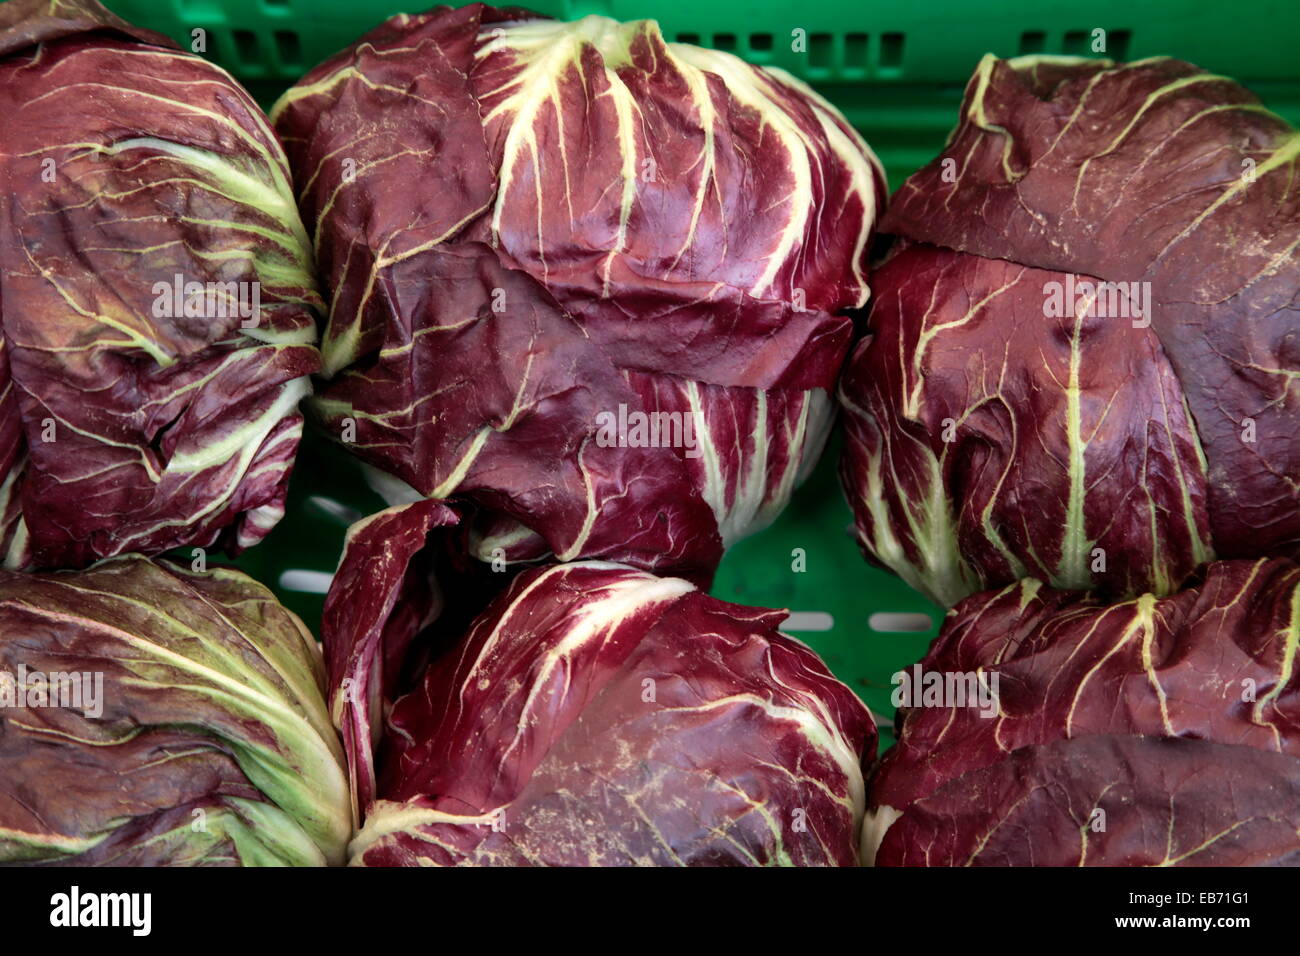 A pile of fresh, ripe red cabbage (Brassica oleracea) Stock Photo